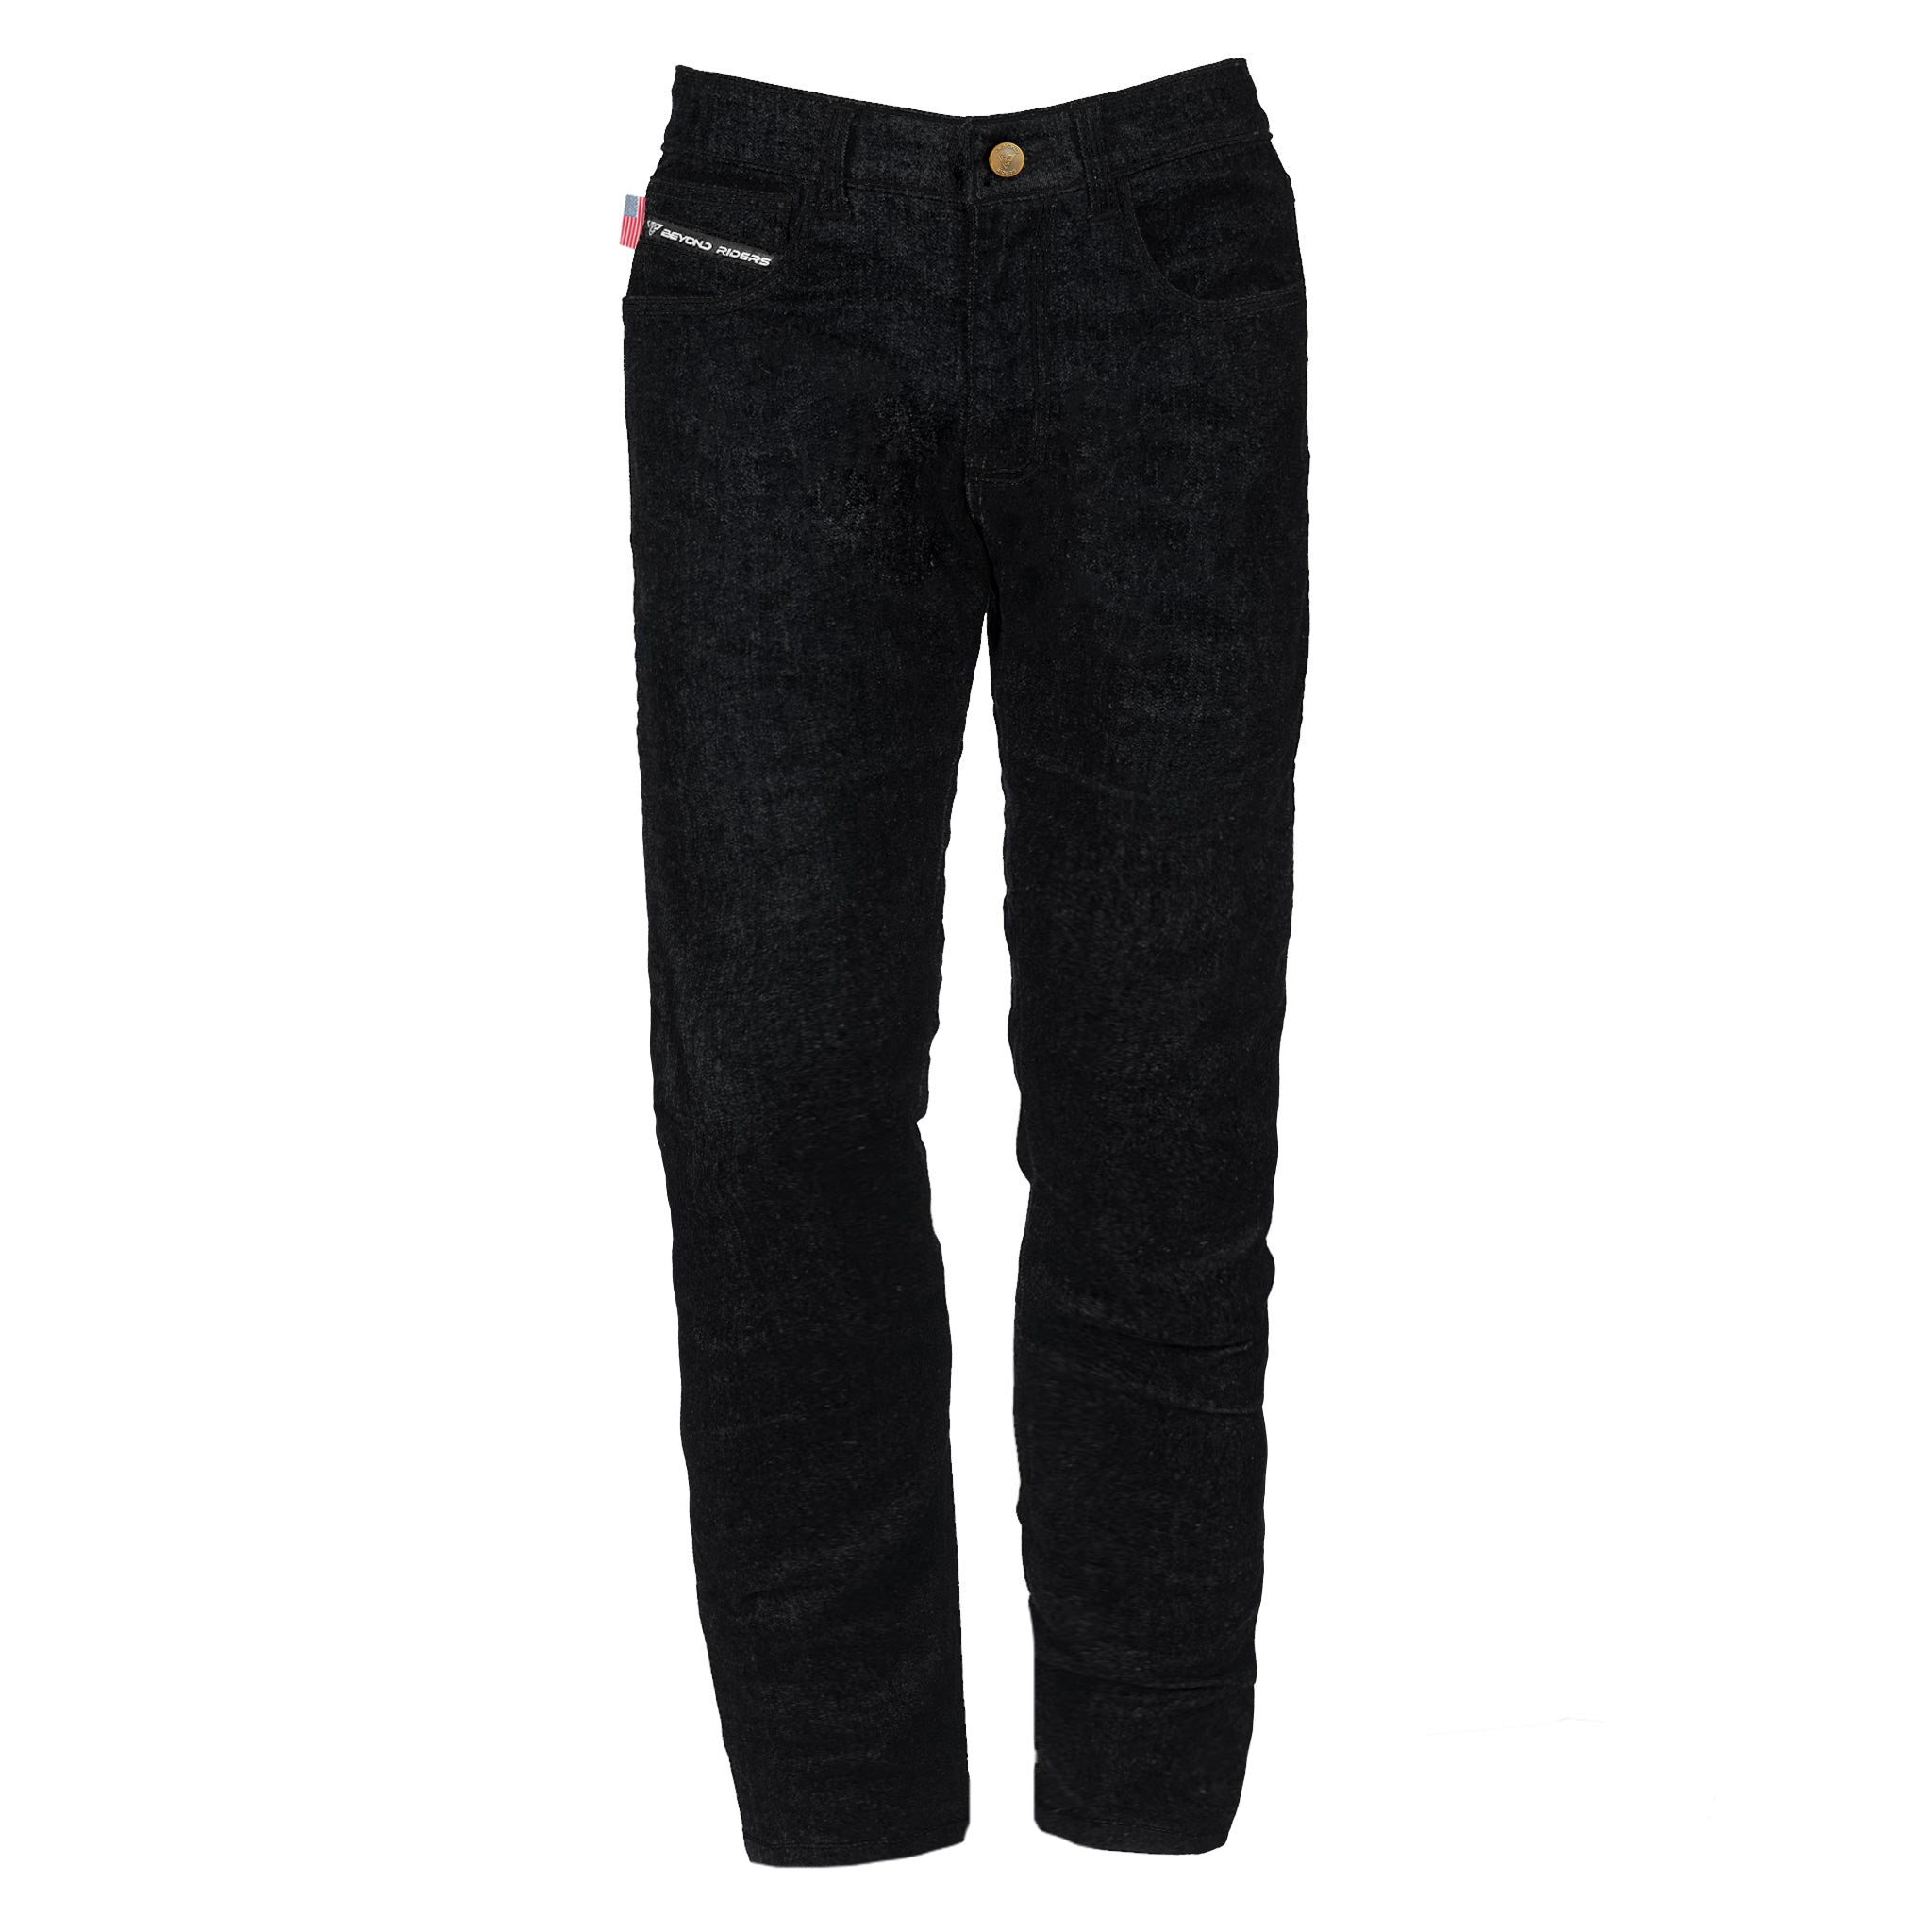 Loose Fit Protective Jeans - Black with Pads